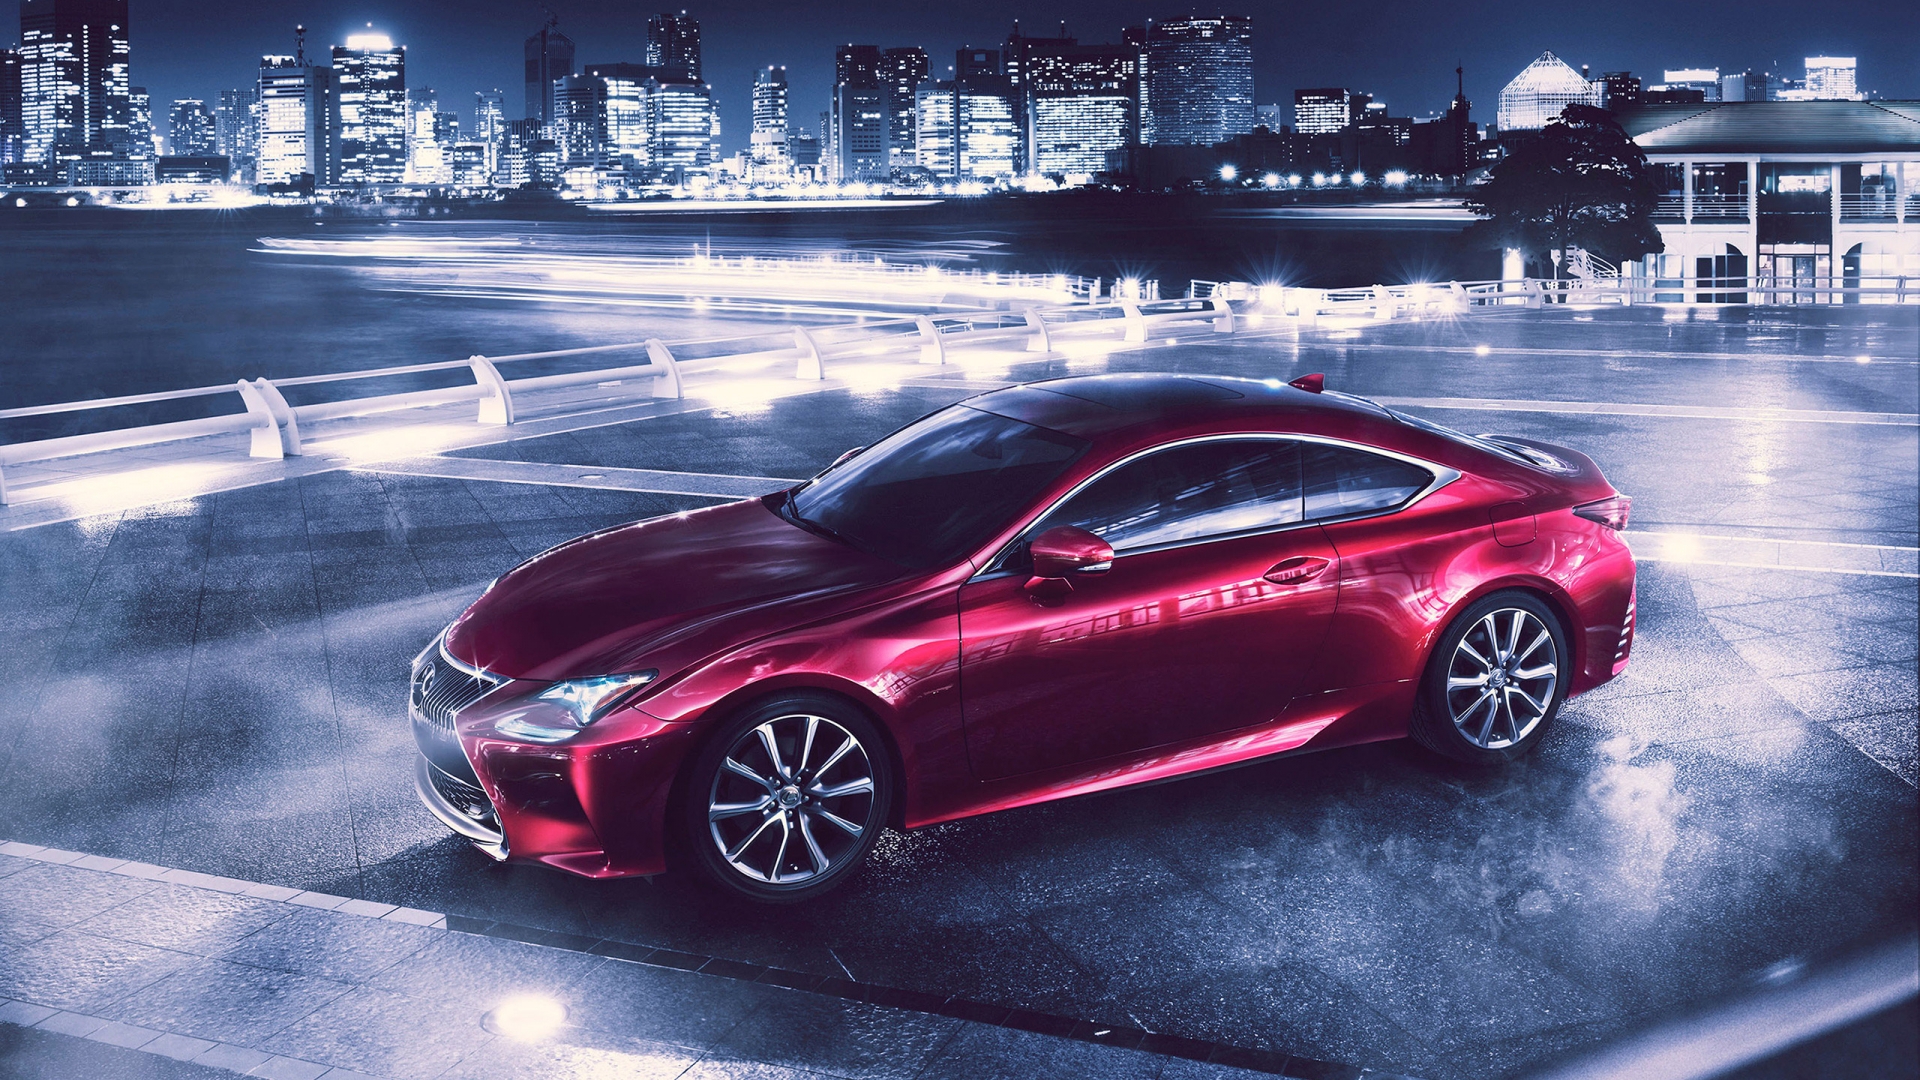 Beautiful 2014 Lexus RC Coupe for 1920 x 1080 HDTV 1080p resolution